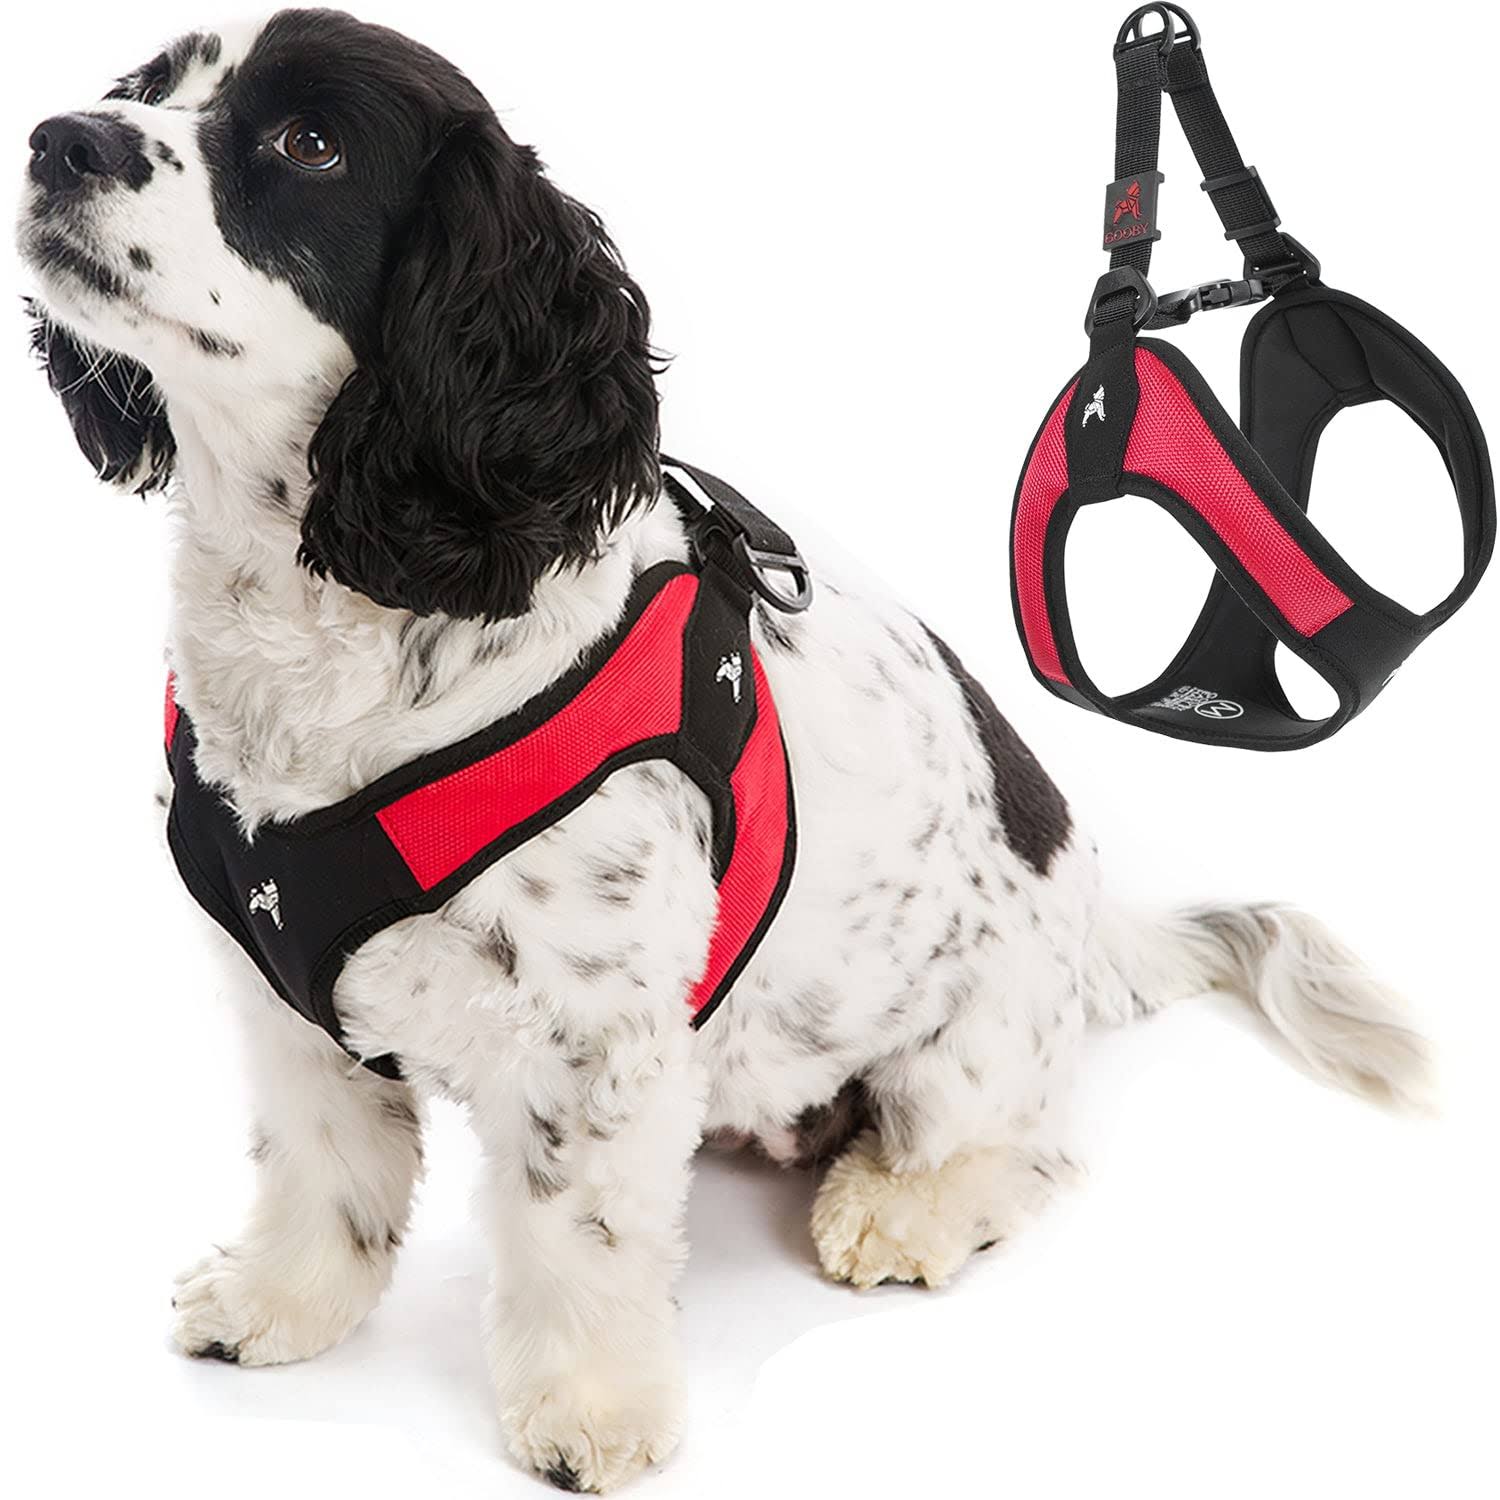 (Medium, Red) - Gooby Escape Proof [Escape Free] Easy Fit Dog Harness For Dogs That Likes to Escape Their Harnesses